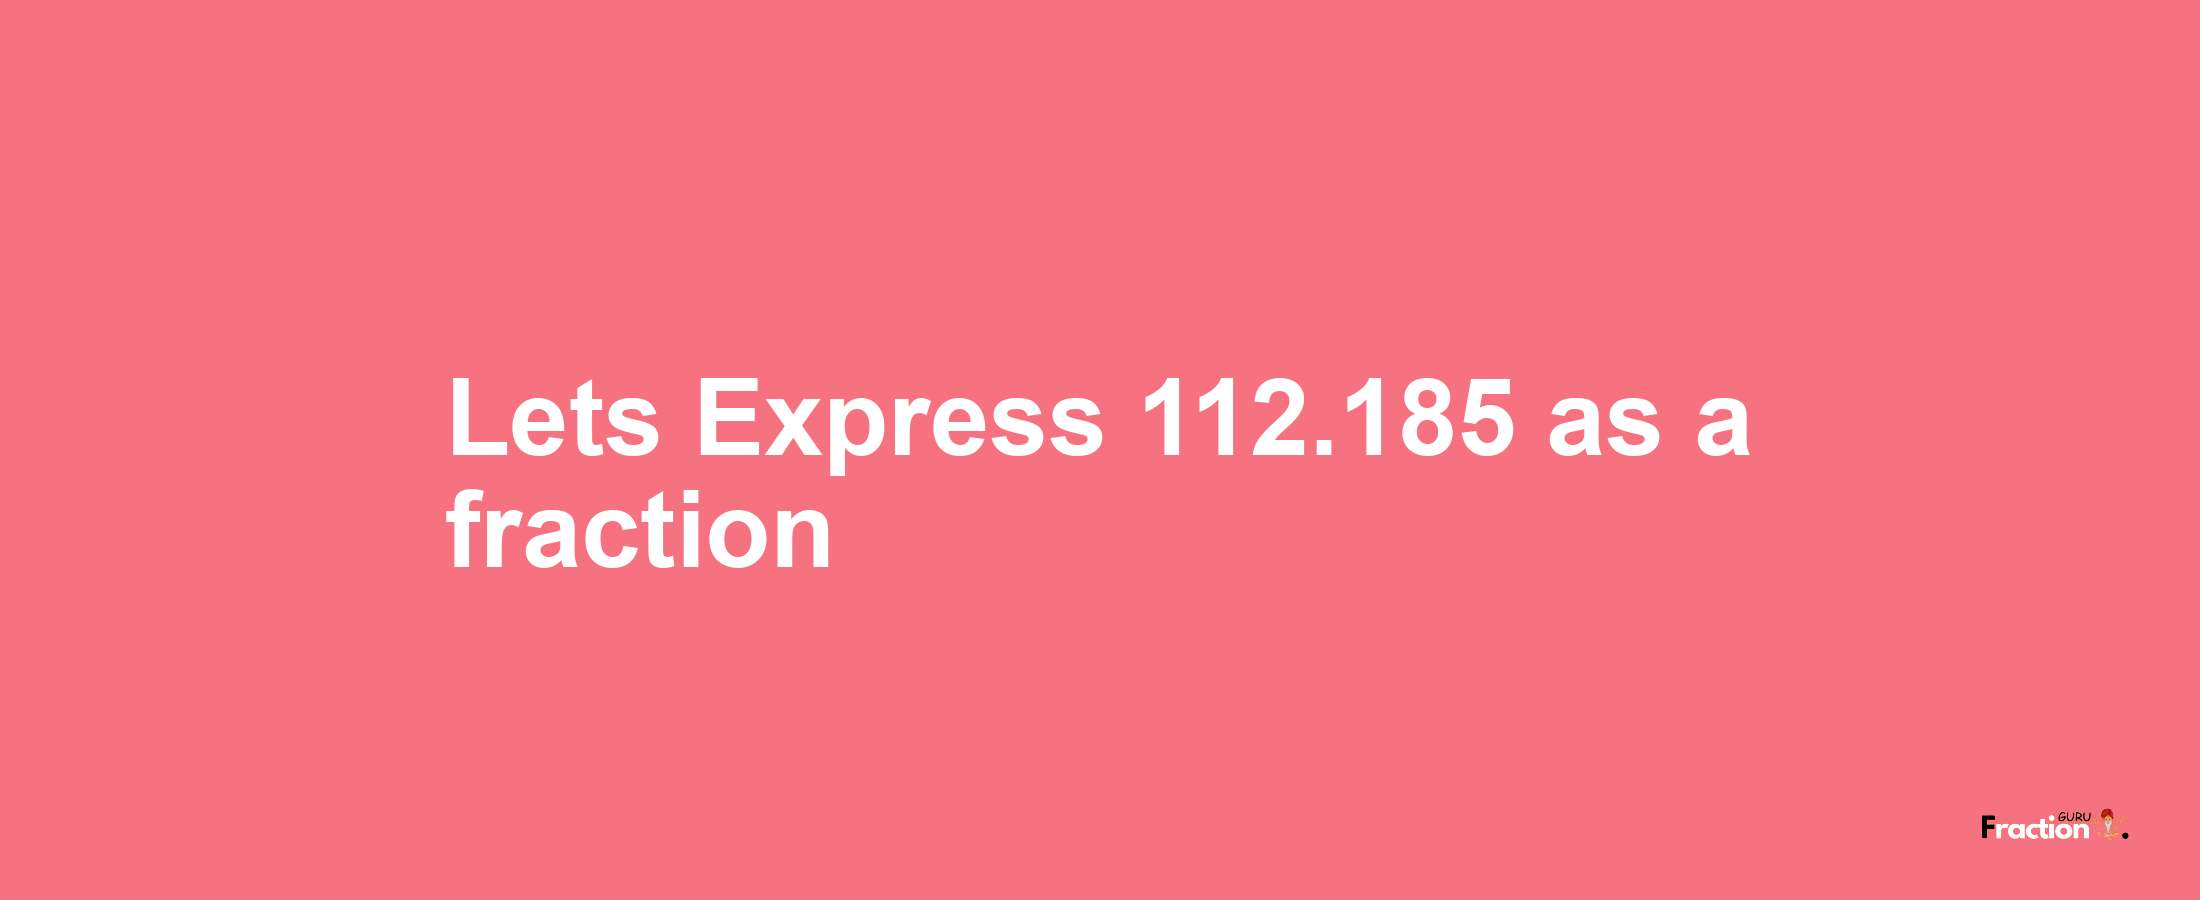 Lets Express 112.185 as afraction